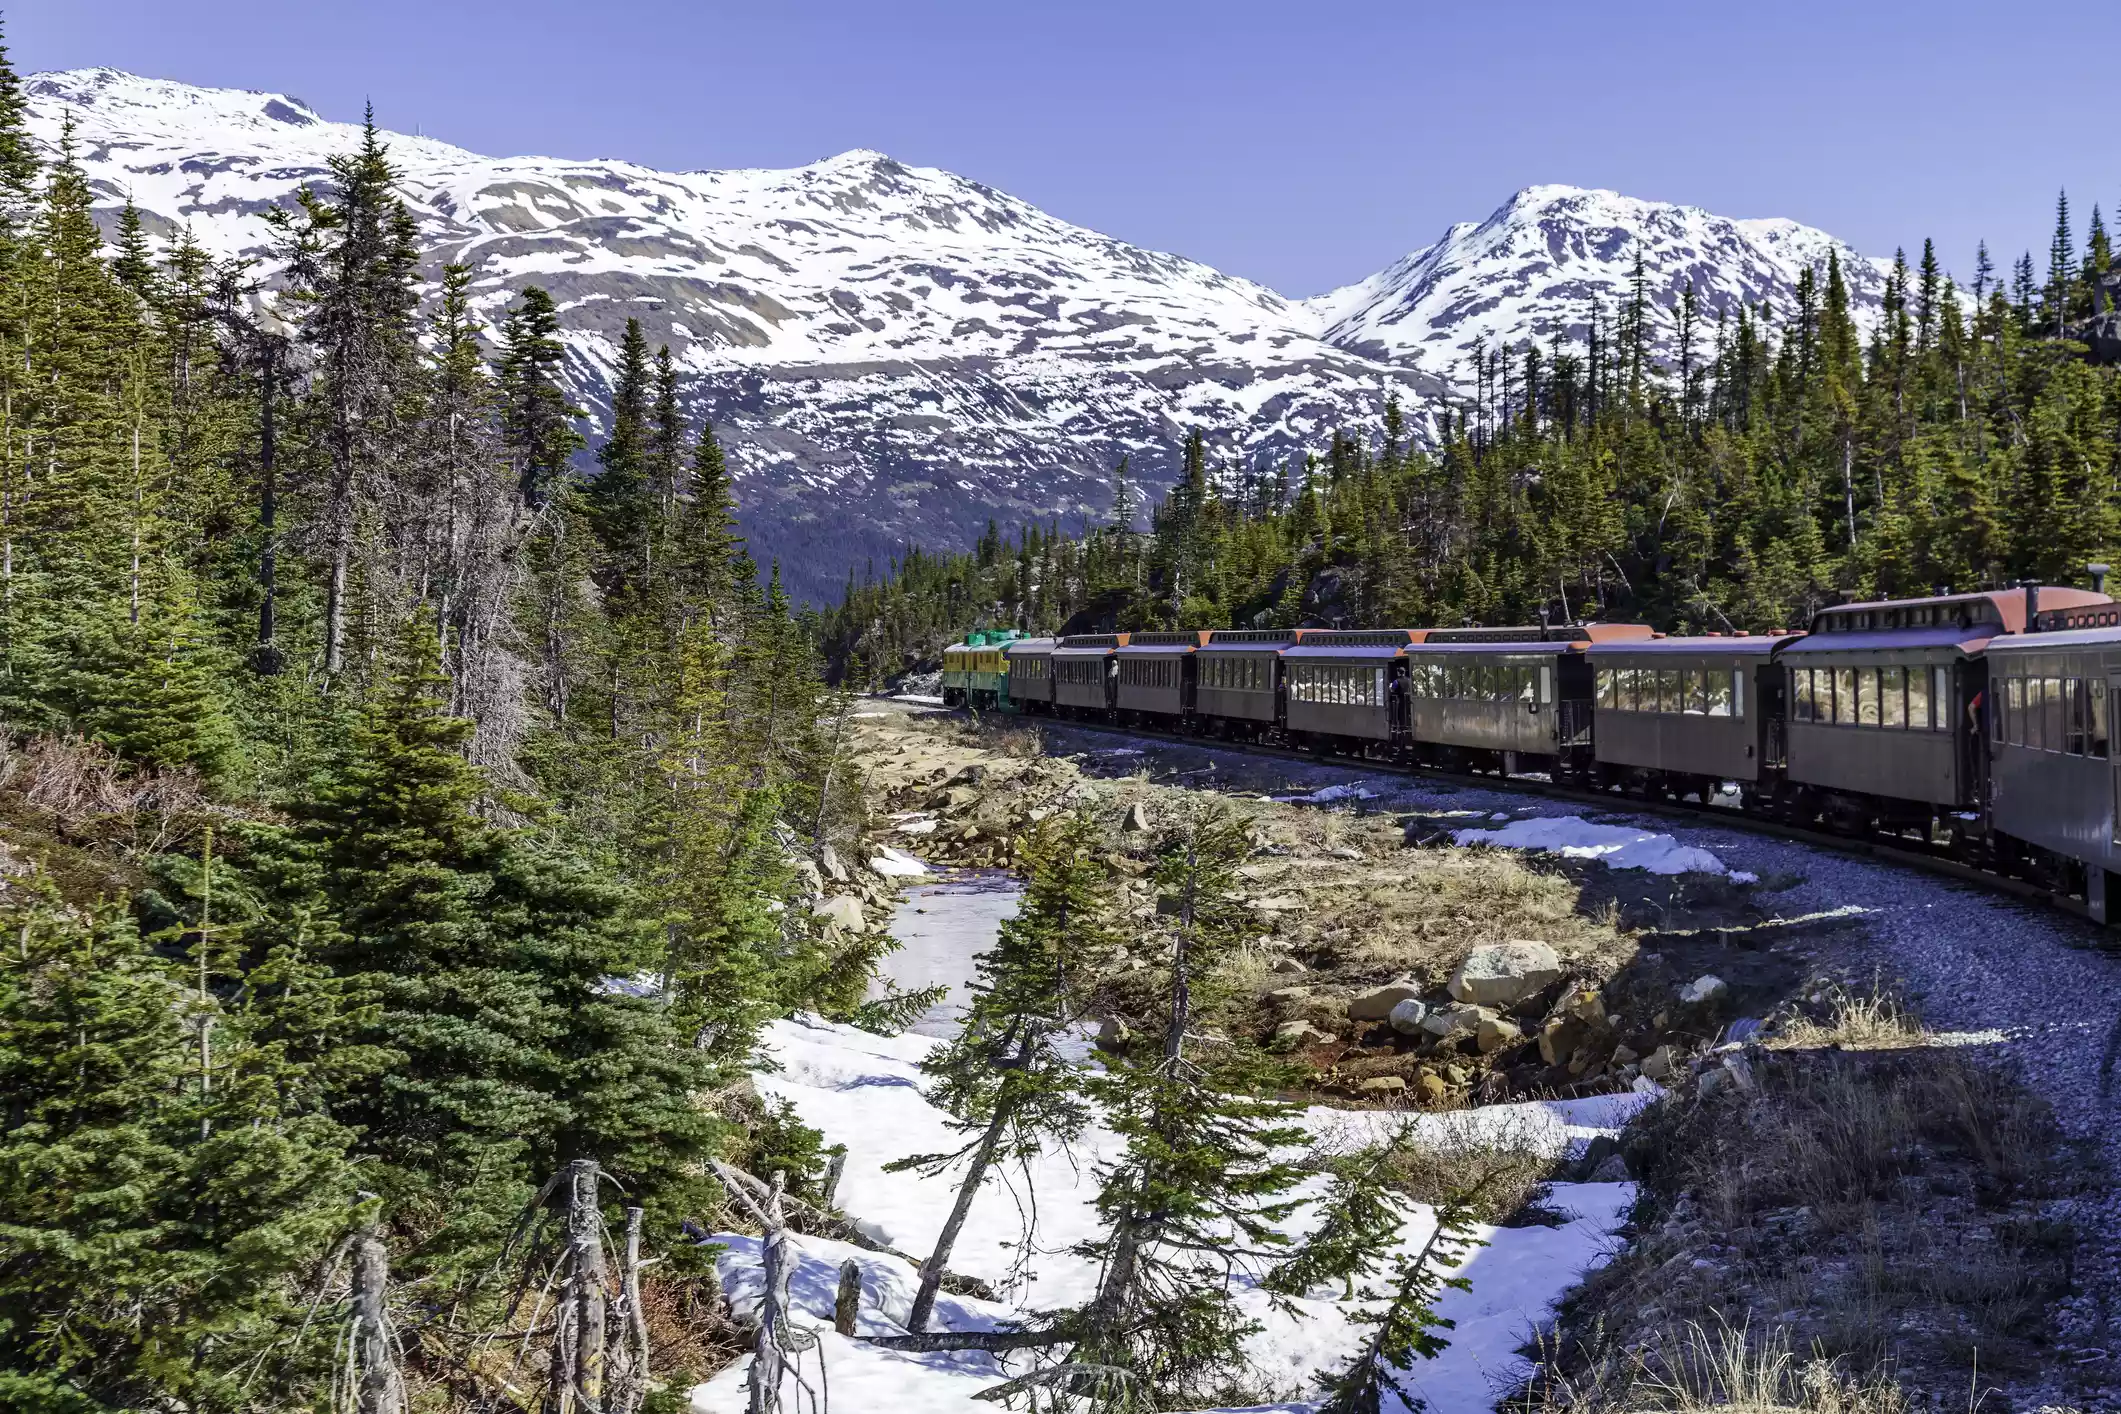 A passenger train travels through a landscape of pine trees and snow-capped mountains